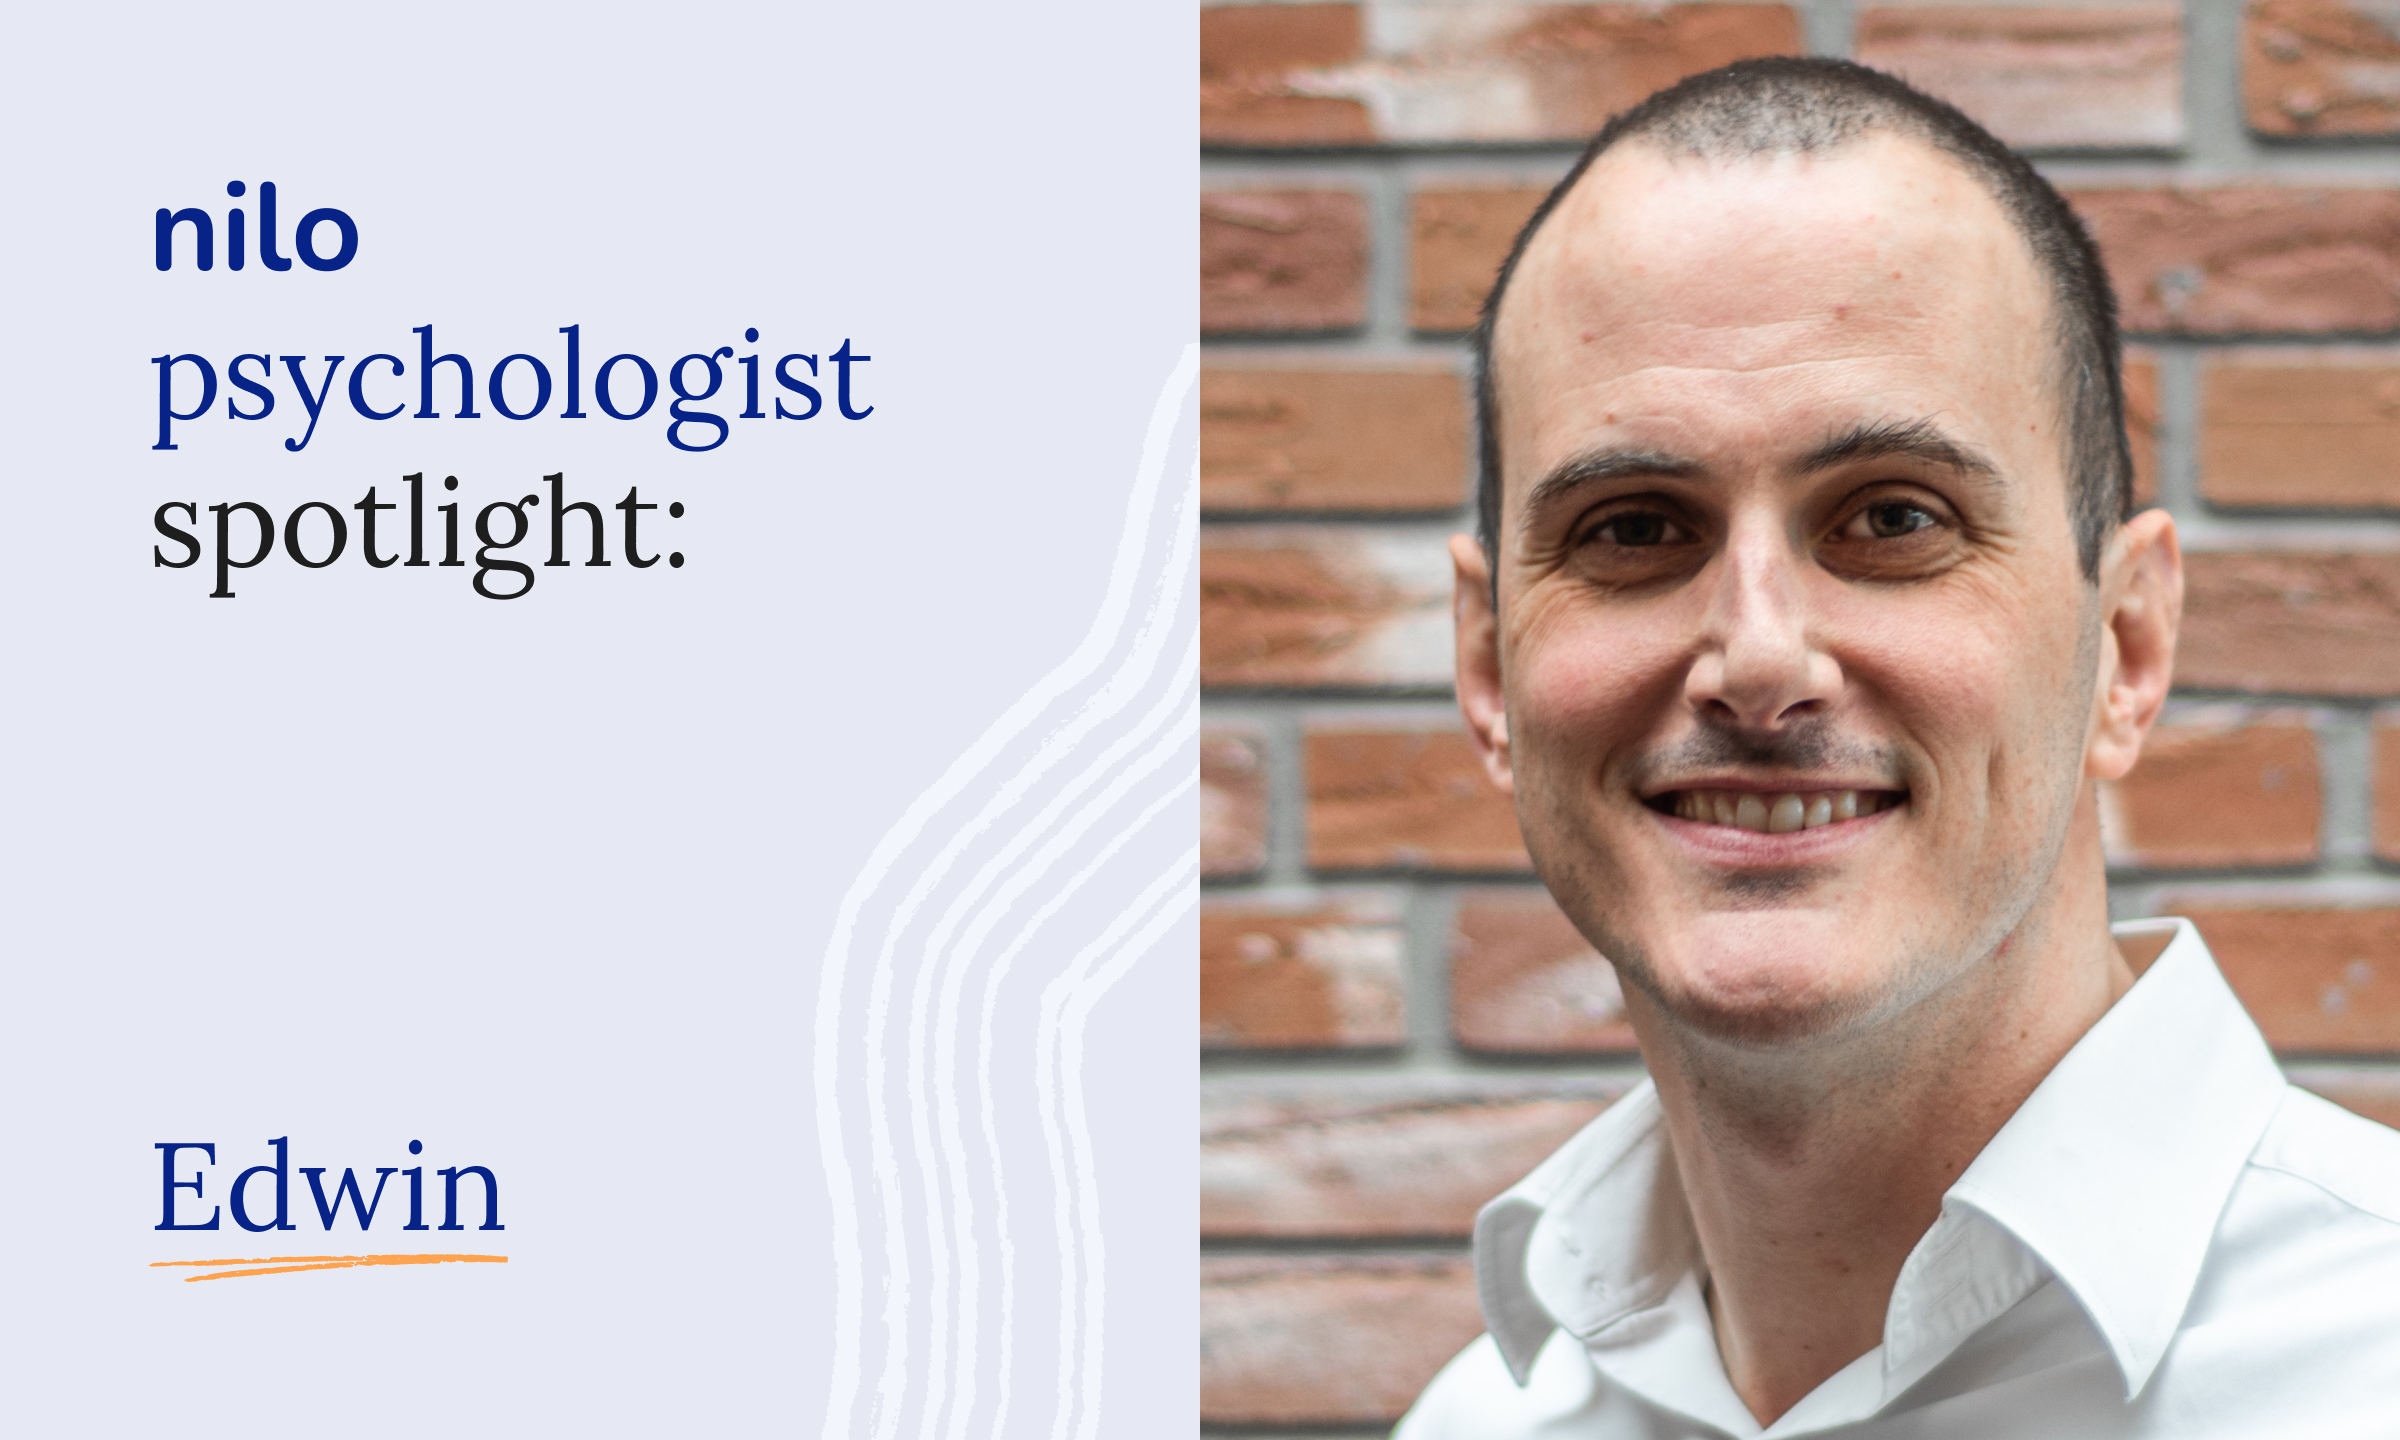 An image featuring a psychologist Edwin in the spotlight, representing their expertise in the field of psychology.